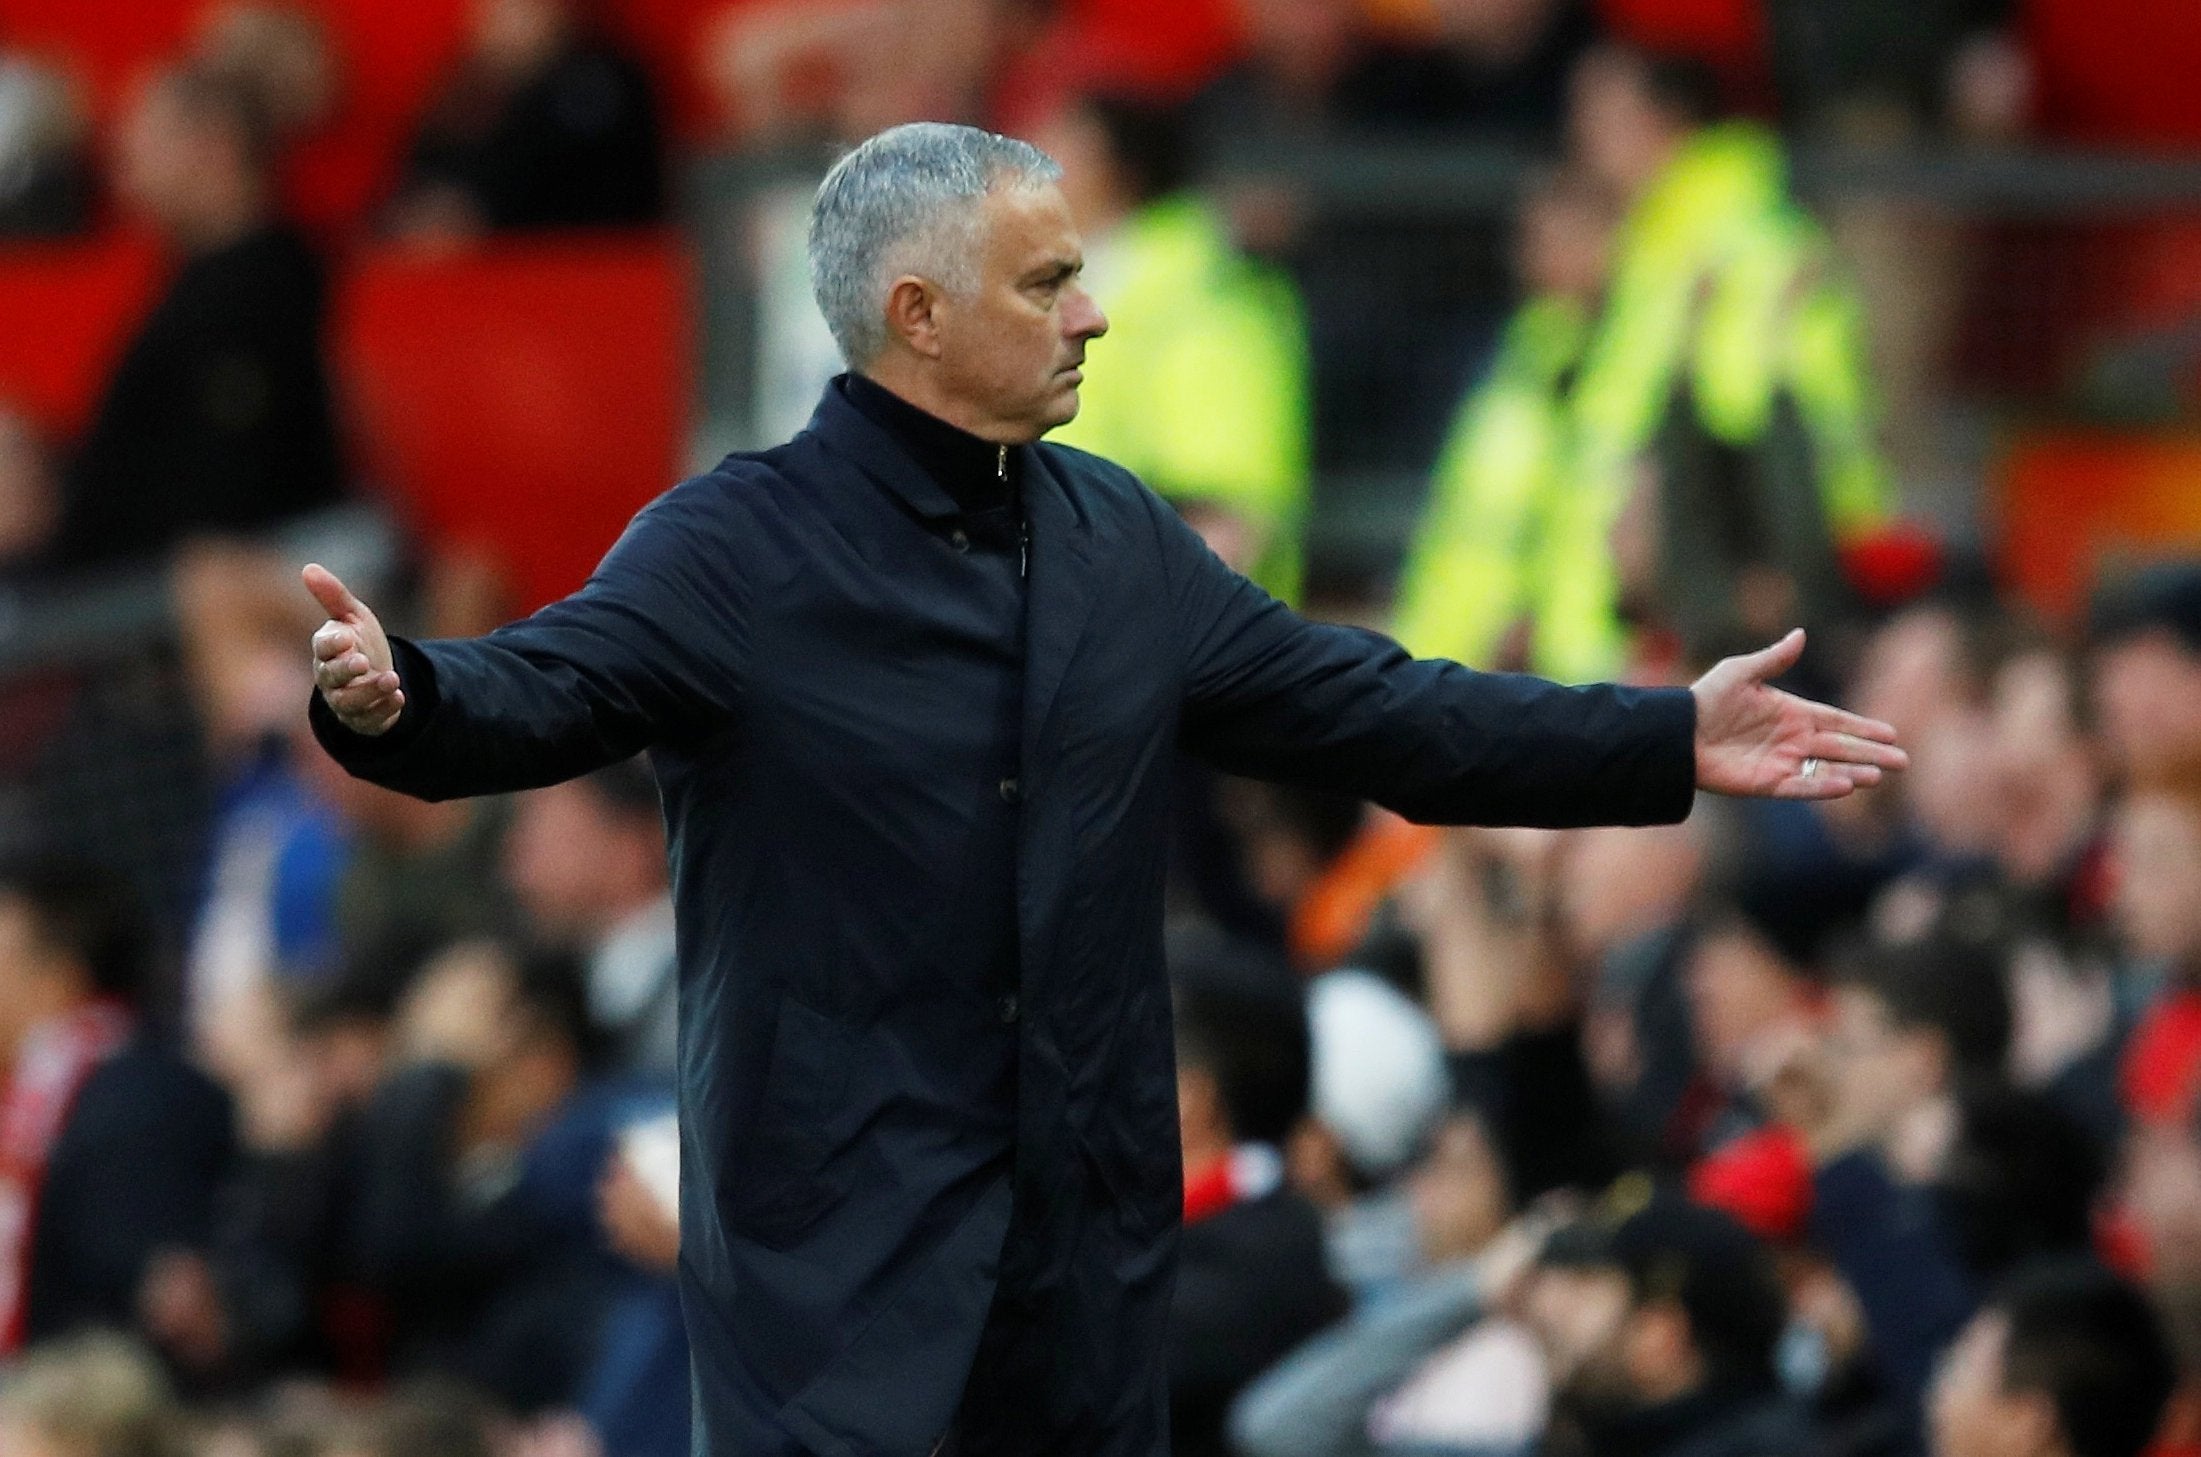 Jose Mourinho has become increasingly disillusioned with the forward